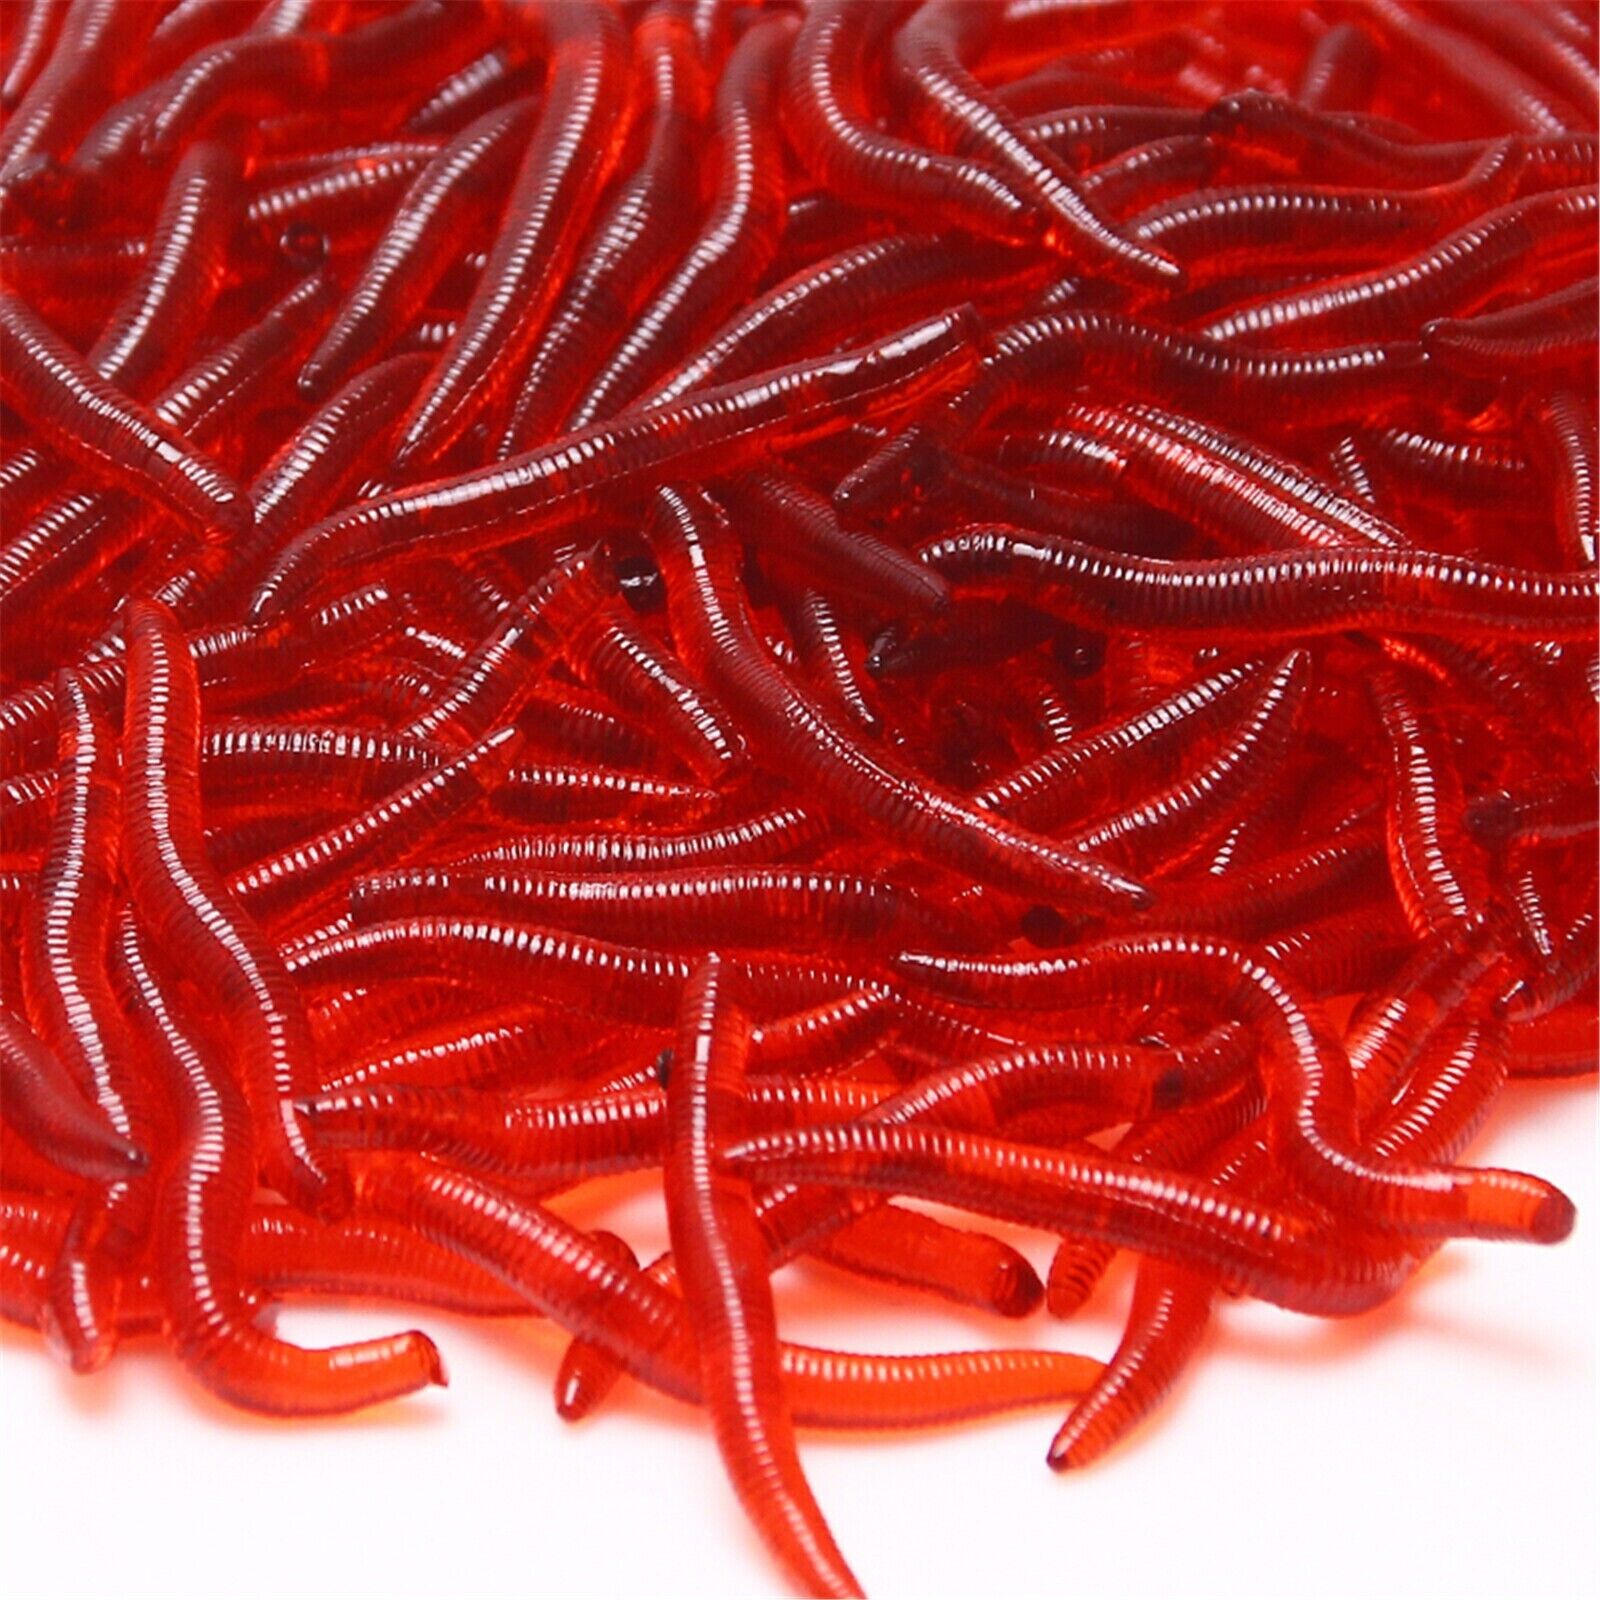 Fishing with Bloodworms as Bait